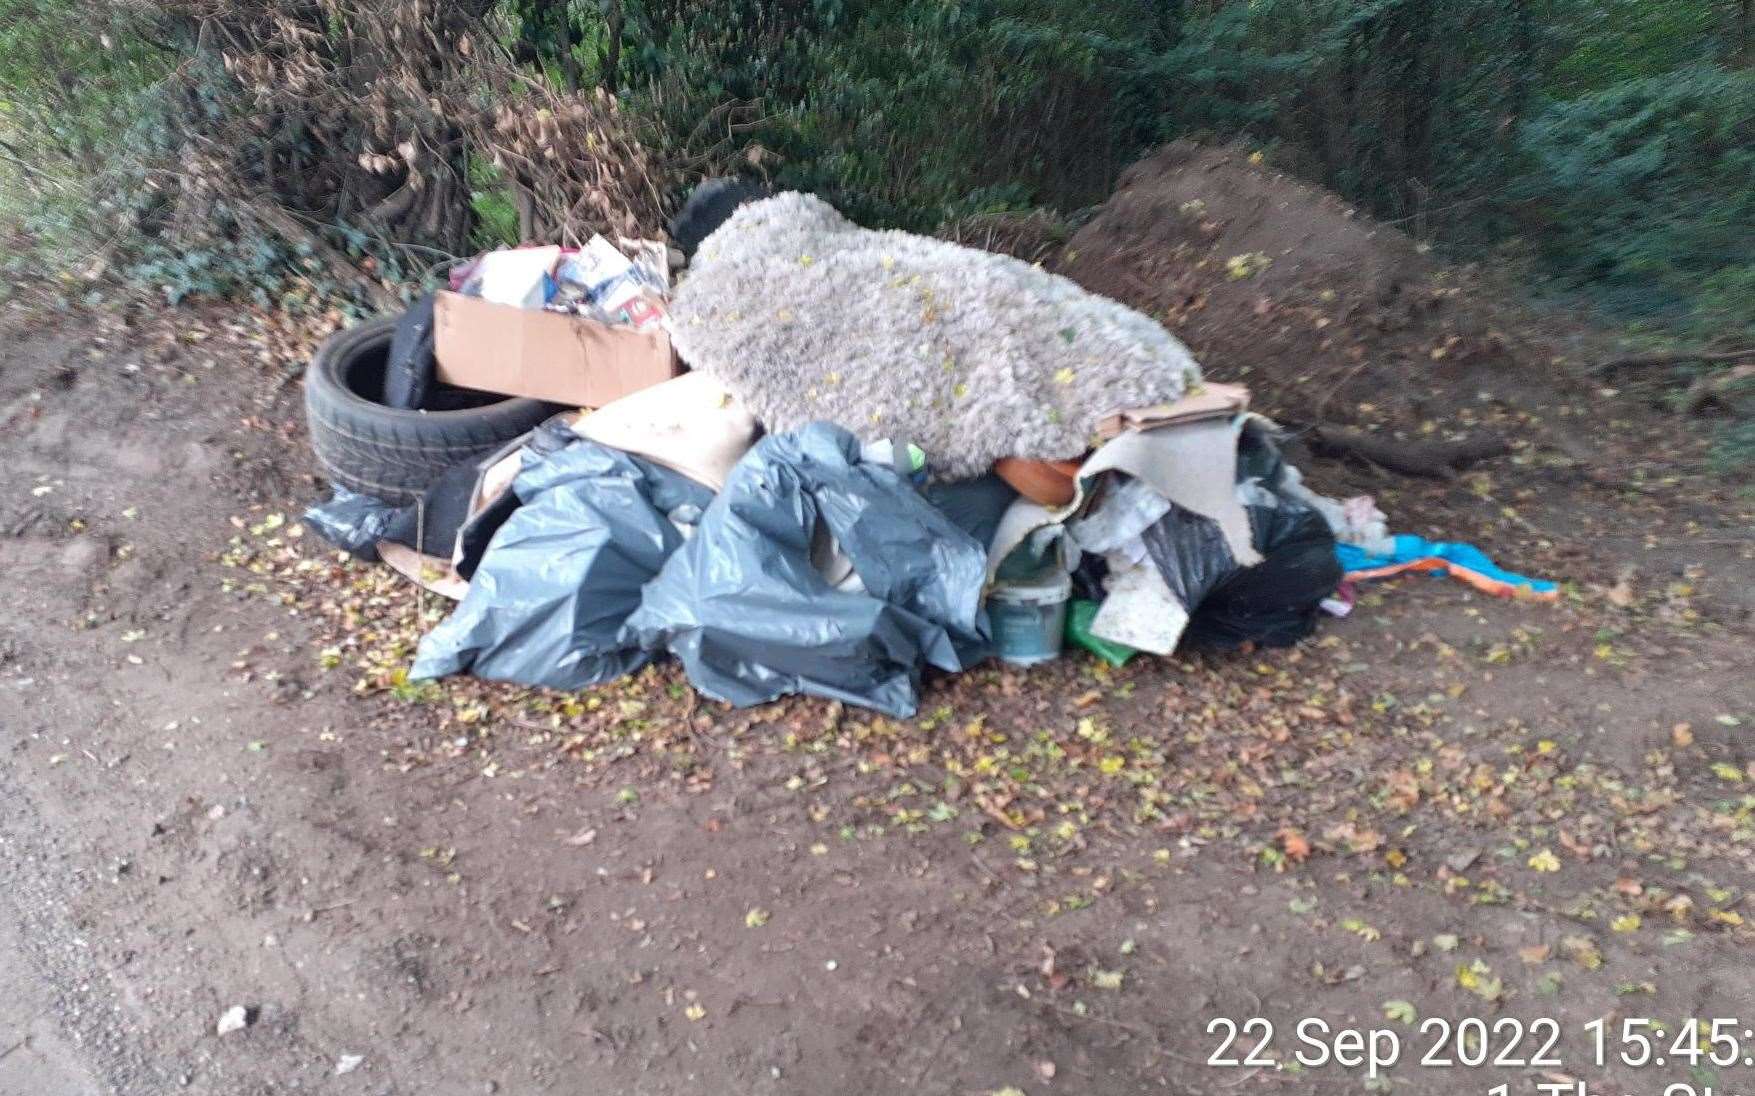 This pile contains tyres, carpets, and other large objects. Picture: Swale Borough Council